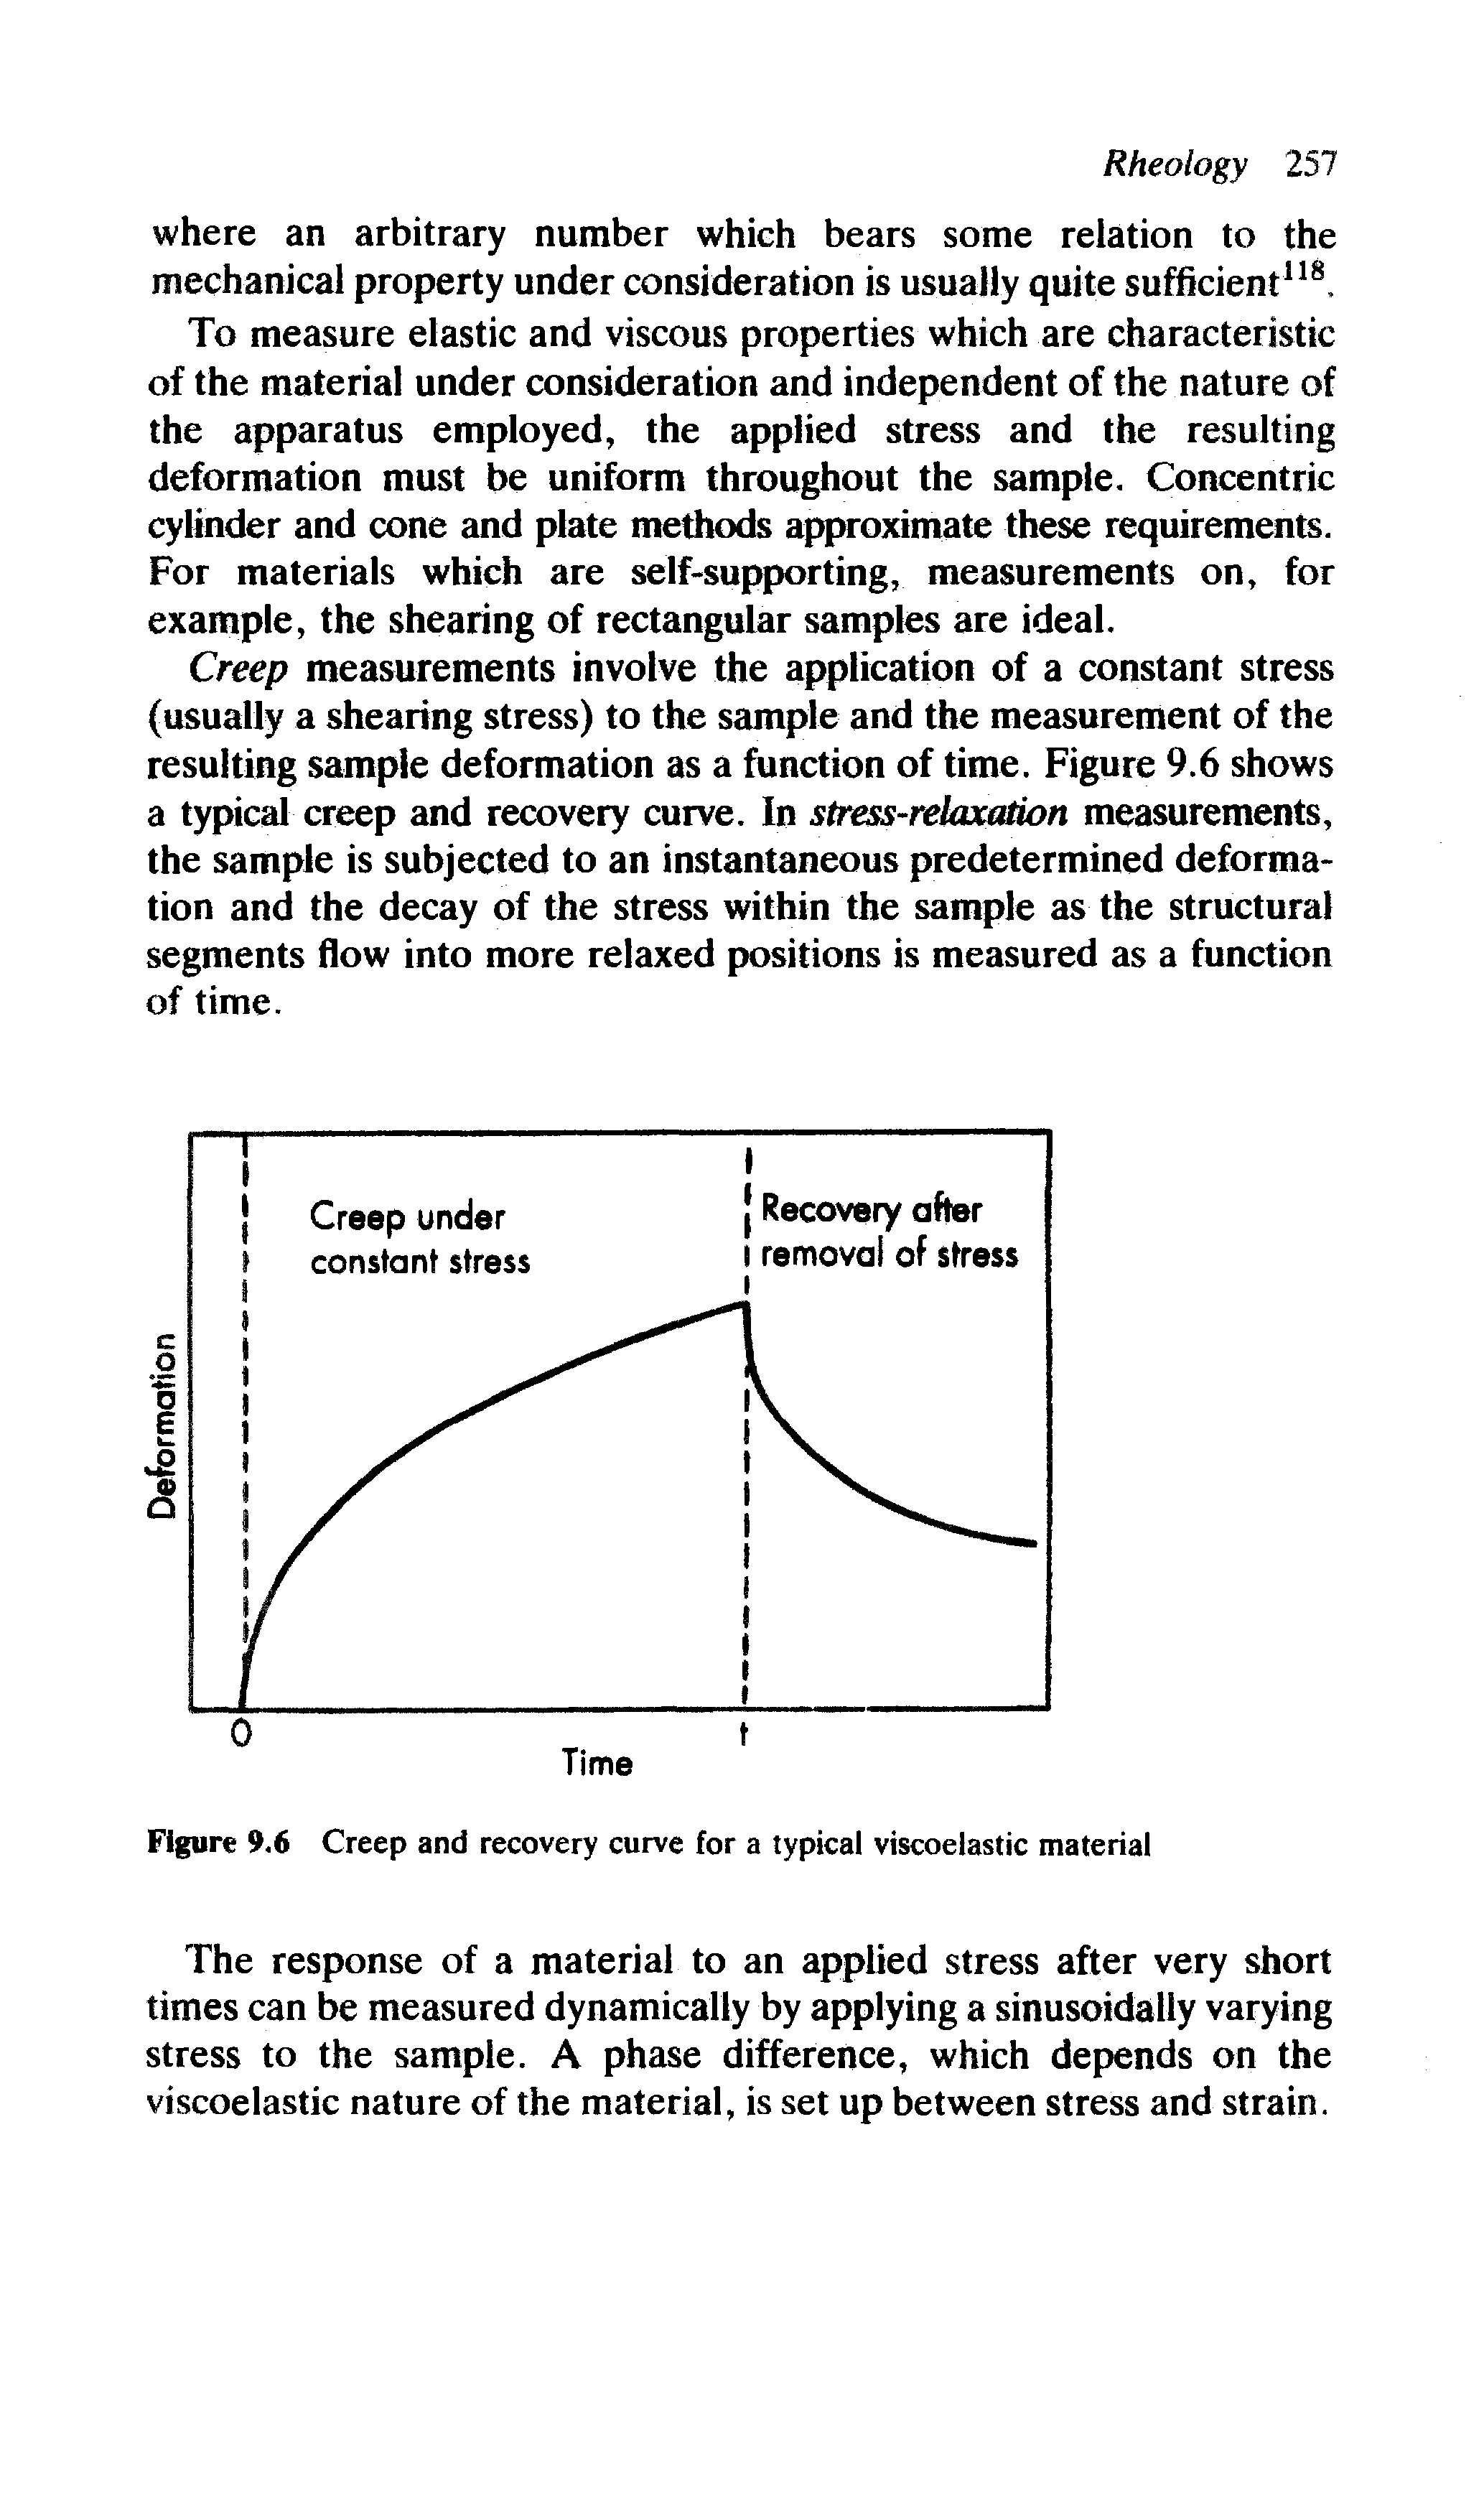 Figure 9.6 Creep and recovery curve for a typical viscoelastic material...